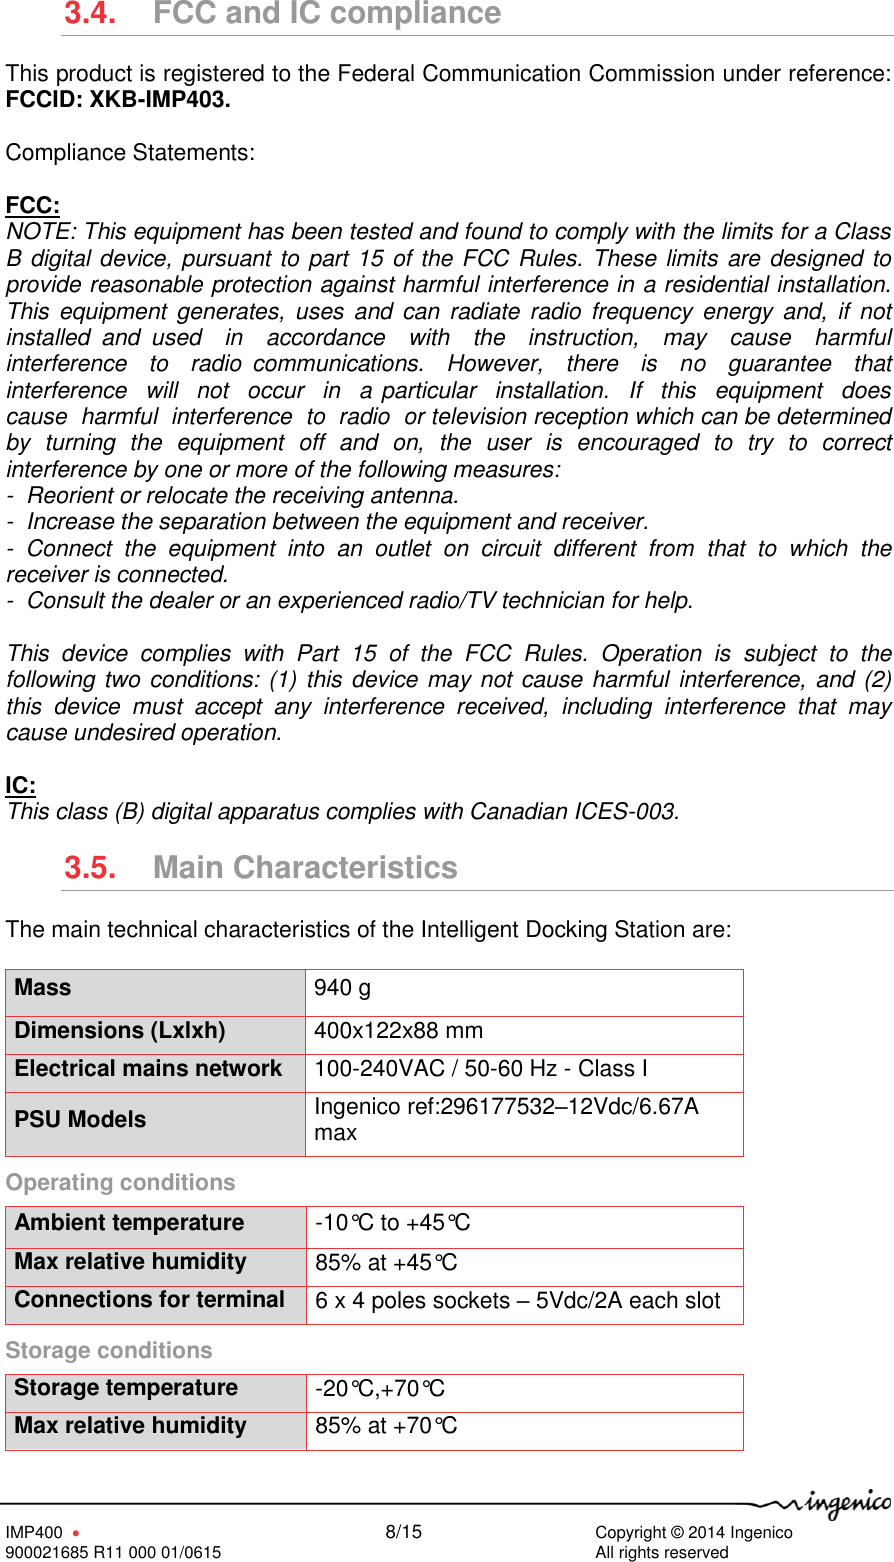   IMP400      8/15     Copyright © 2014 Ingenico 900021685 R11 000 01/0615        All rights reserved   3.4.  FCC and IC compliance This product is registered to the Federal Communication Commission under reference: FCCID: XKB-IMP403.  Compliance Statements:  FCC: NOTE: This equipment has been tested and found to comply with the limits for a Class B digital device, pursuant to part 15 of the FCC Rules. These limits are designed to provide reasonable protection against harmful interference in a residential installation.  This  equipment  generates,  uses  and  can radiate radio frequency  energy  and,  if  not installed  and  used    in    accordance    with    the    instruction,    may    cause    harmful  interference    to    radio  communications.    However,    there    is    no    guarantee    that  interference  will  not  occur  in  a particular  installation.  If  this  equipment  does  cause  harmful  interference  to  radio  or television reception which can be determined by  turning  the  equipment  off  and  on,  the  user  is  encouraged  to  try  to  correct interference by one or more of the following measures:  -  Reorient or relocate the receiving antenna.  -  Increase the separation between the equipment and receiver.  -  Connect  the  equipment  into  an  outlet  on  circuit  different  from  that  to  which  the receiver is connected.  -  Consult the dealer or an experienced radio/TV technician for help.  This  device  complies  with  Part  15  of  the  FCC  Rules.  Operation  is  subject  to  the following two conditions: (1) this device may not cause harmful interference, and (2) this  device  must  accept  any  interference  received,  including  interference  that  may cause undesired operation.  IC: This class (B) digital apparatus complies with Canadian ICES-003. 3.5.  Main Characteristics The main technical characteristics of the Intelligent Docking Station are:  Mass 940 g  Dimensions (Lxlxh) 400x122x88 mm Electrical mains network 100-240VAC / 50-60 Hz - Class I PSU Models Ingenico ref:296177532–12Vdc/6.67A max Operating conditions  Ambient temperature -10°C to +45°C  Max relative humidity 85% at +45°C Connections for terminal 6 x 4 poles sockets – 5Vdc/2A each slot Storage conditions  Storage temperature -20°C,+70°C Max relative humidity 85% at +70°C 